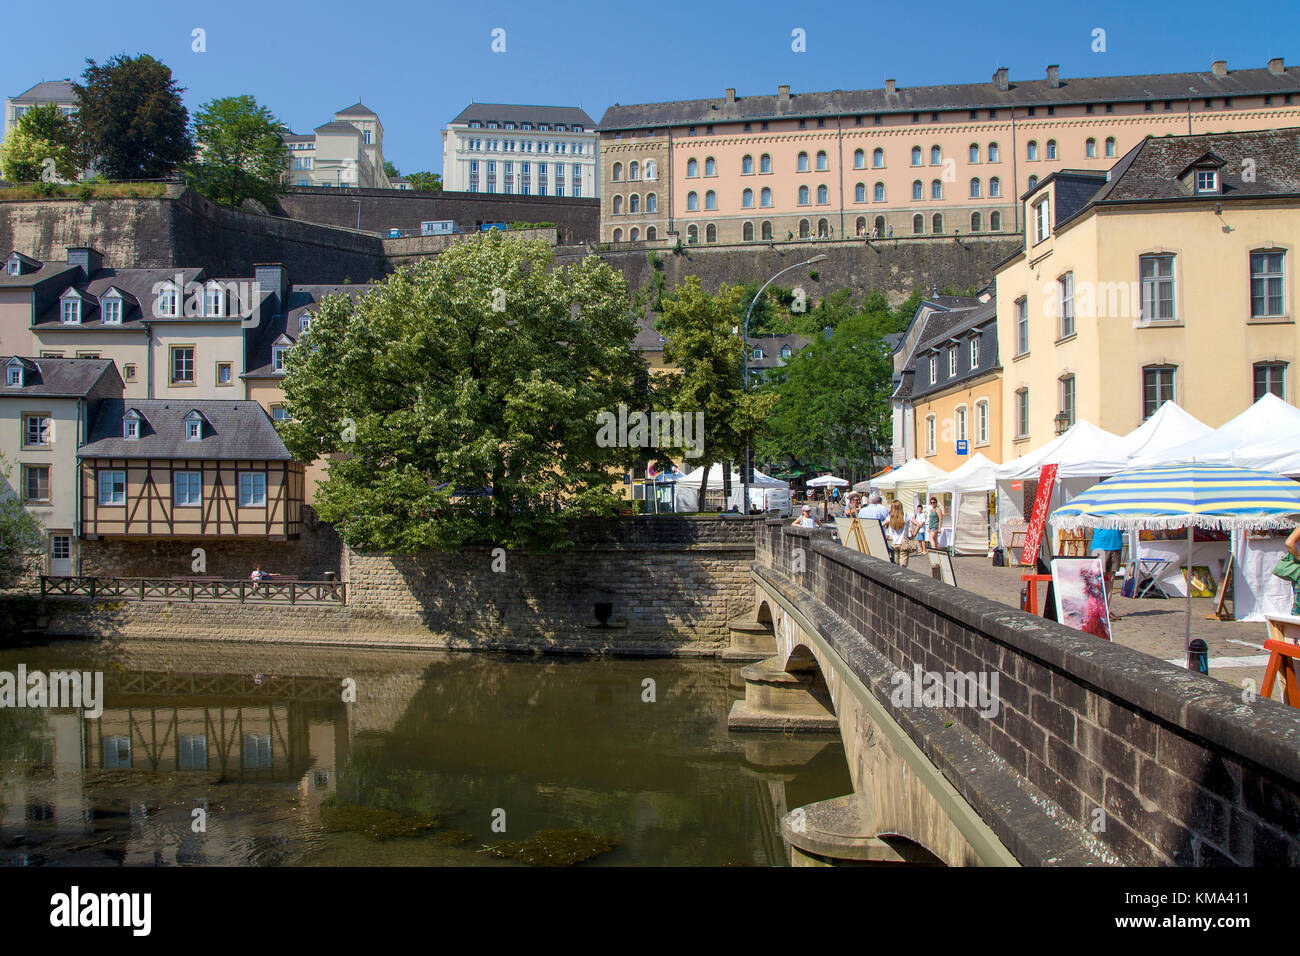 Art exhibition on Ulrichs bridge over Alzette river, lower city, Grund, Luxembourg-city, Luxembourg, Europe Stock Photo